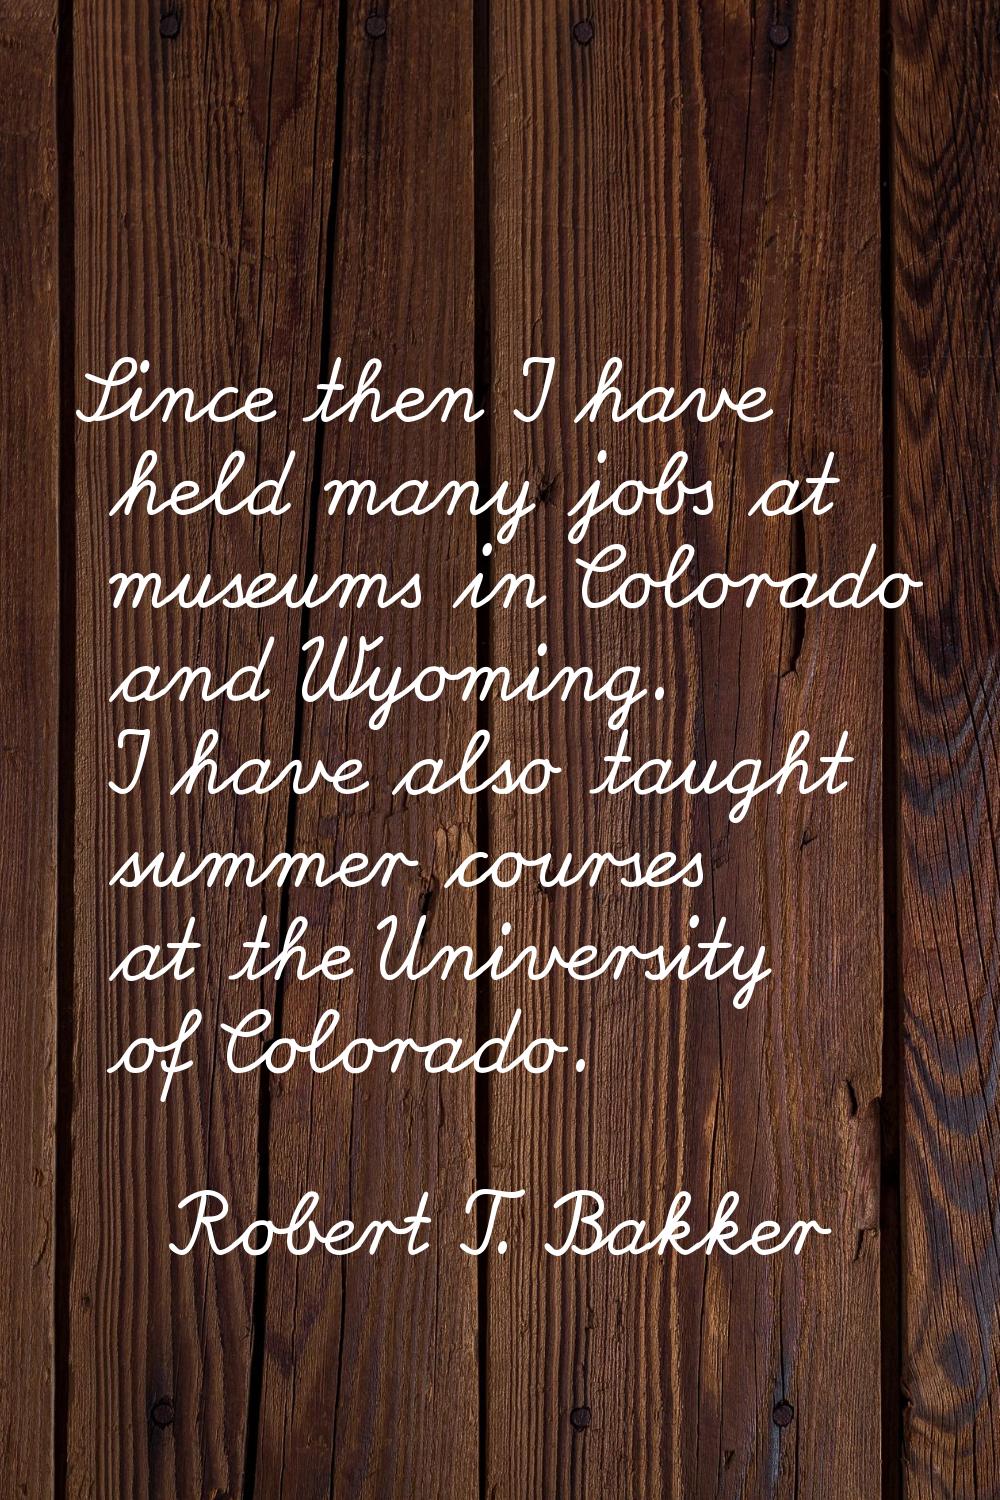 Since then I have held many jobs at museums in Colorado and Wyoming. I have also taught summer cour